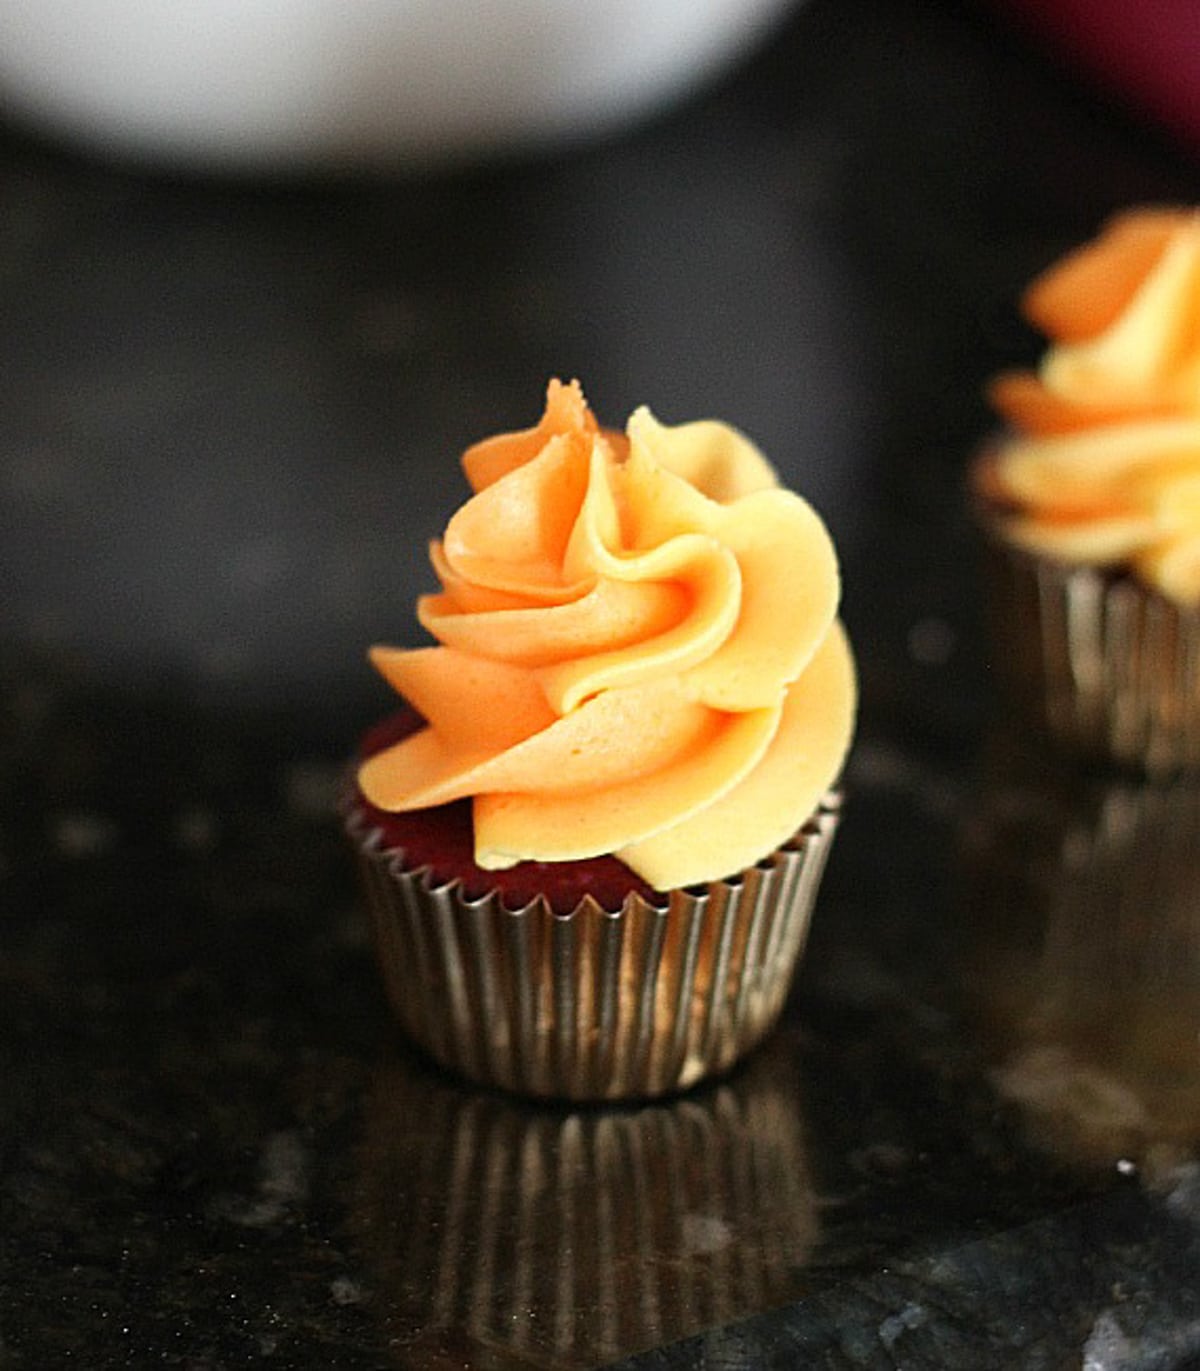 A mini cupcake topped with a swirl of orange frosting.